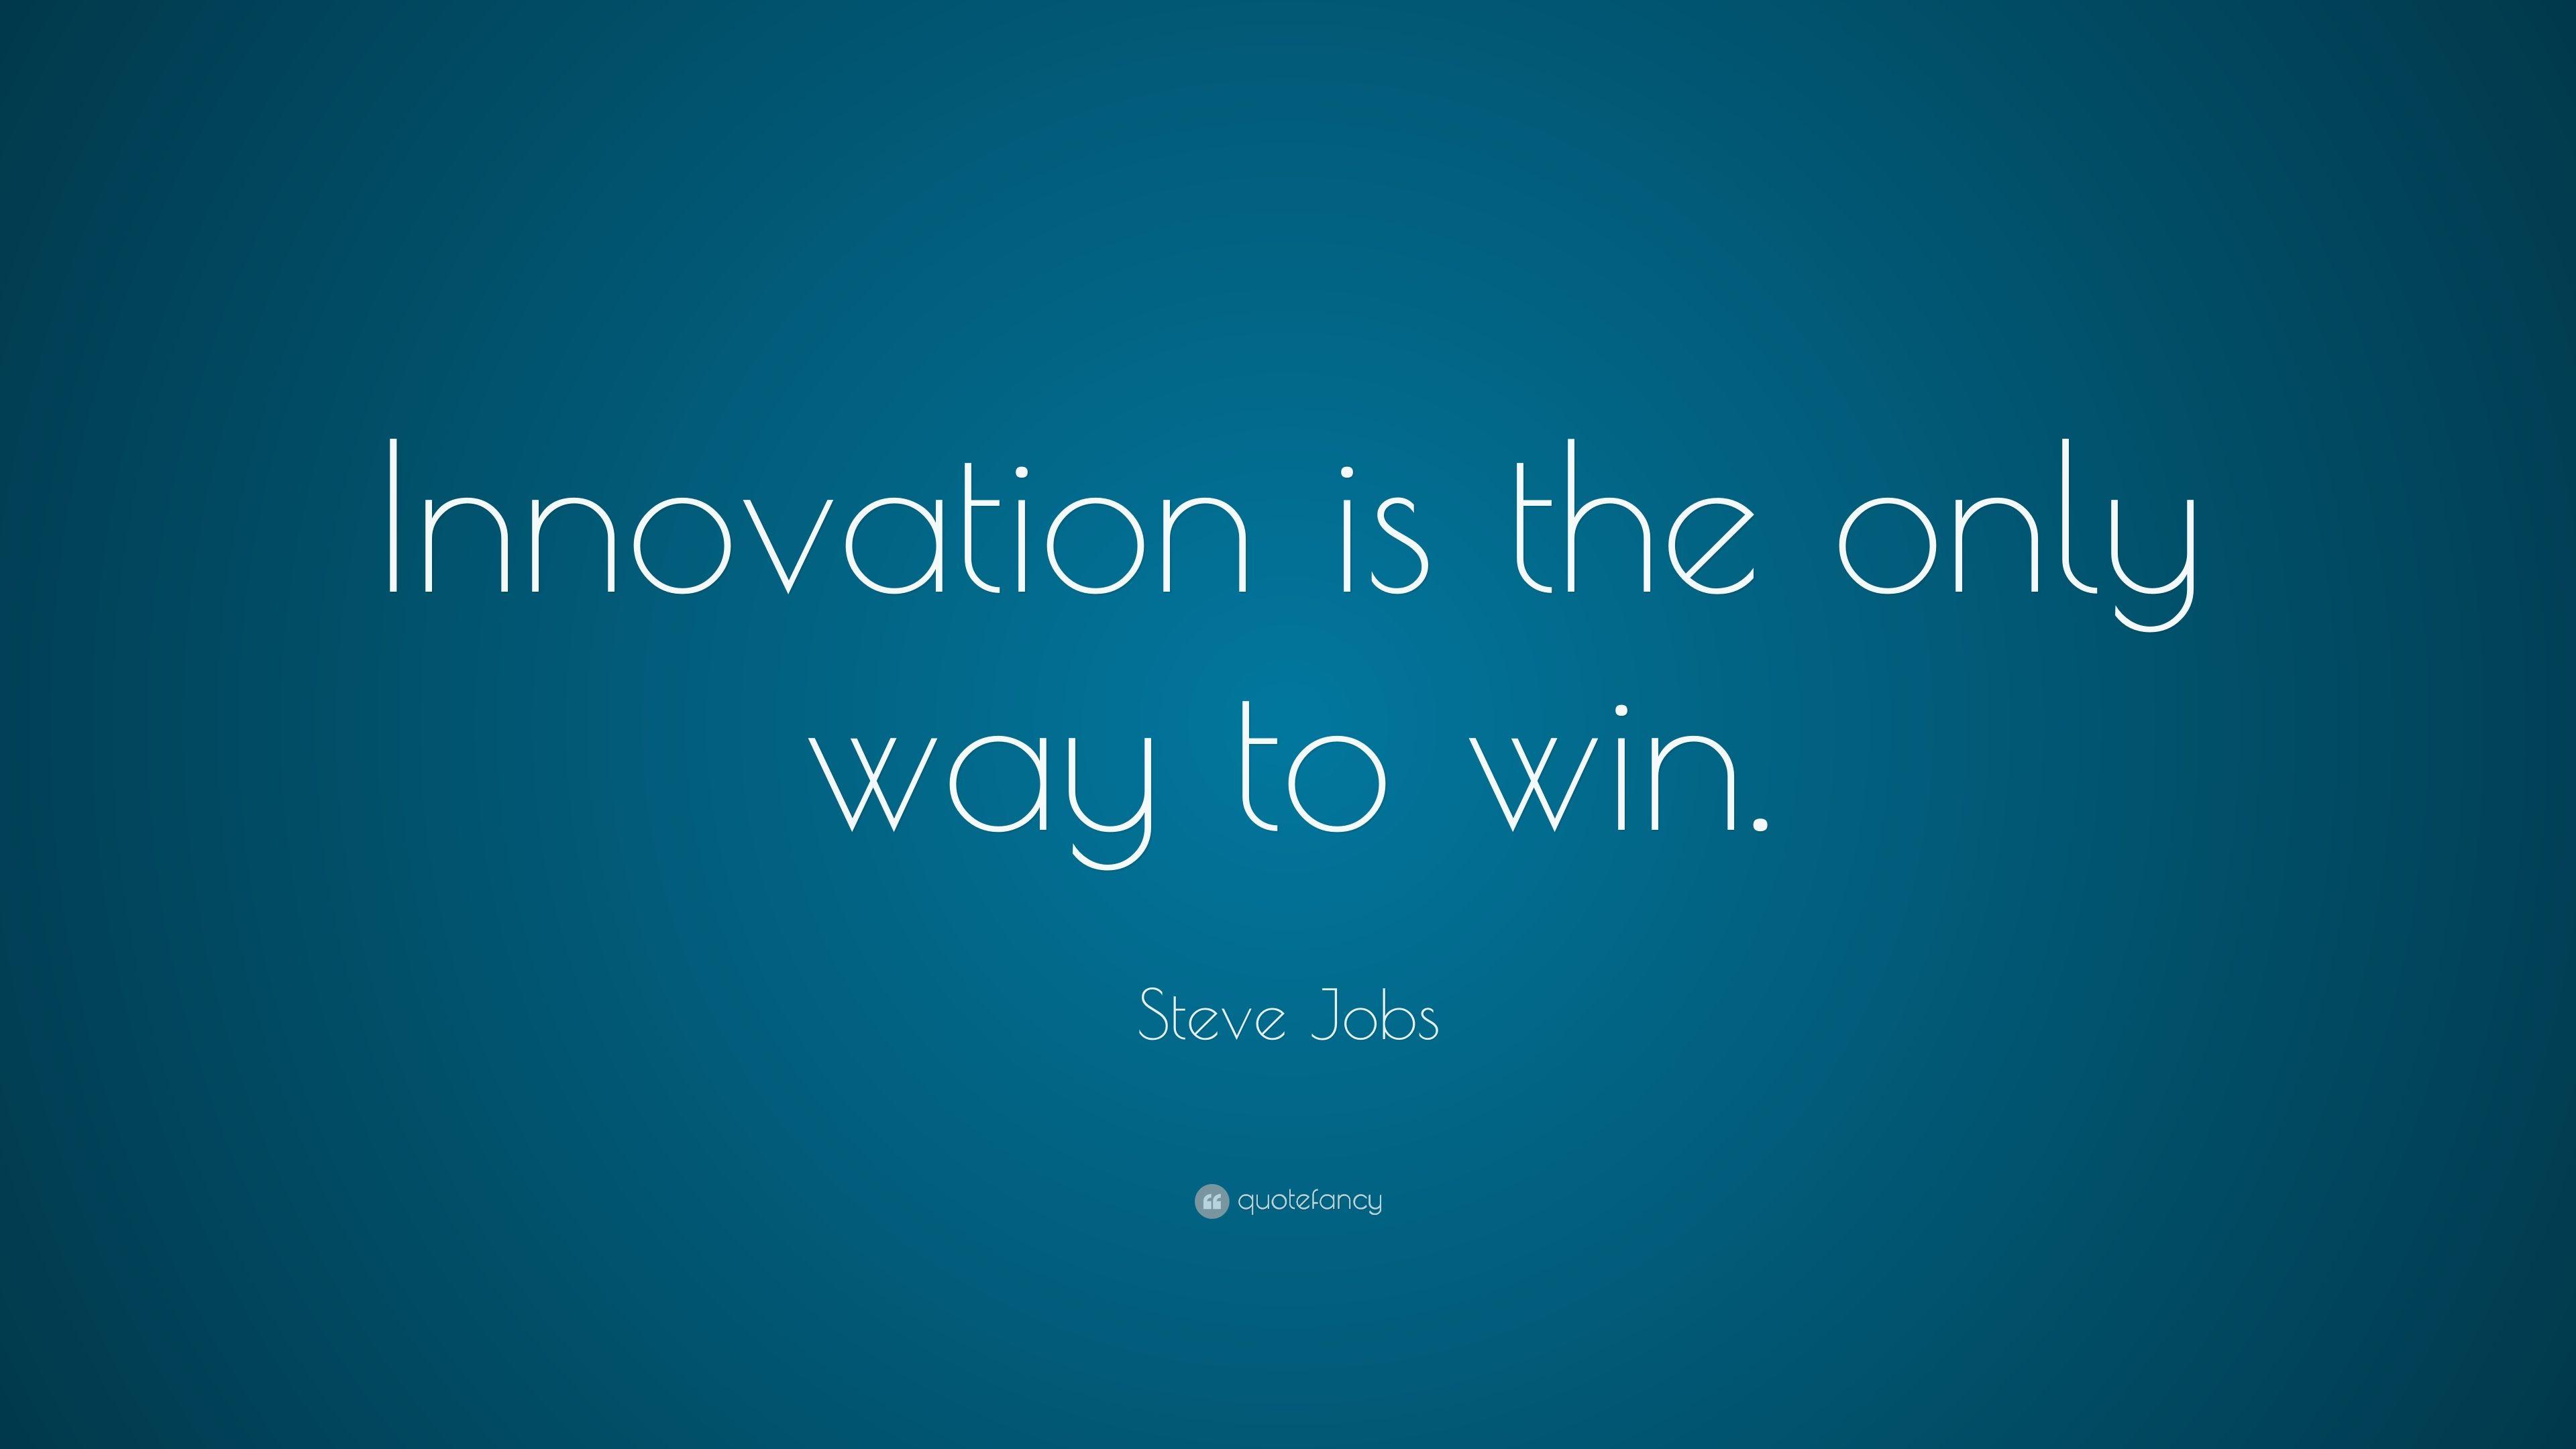 Steve Jobs Quote: “Innovation is the only way to win.” 21